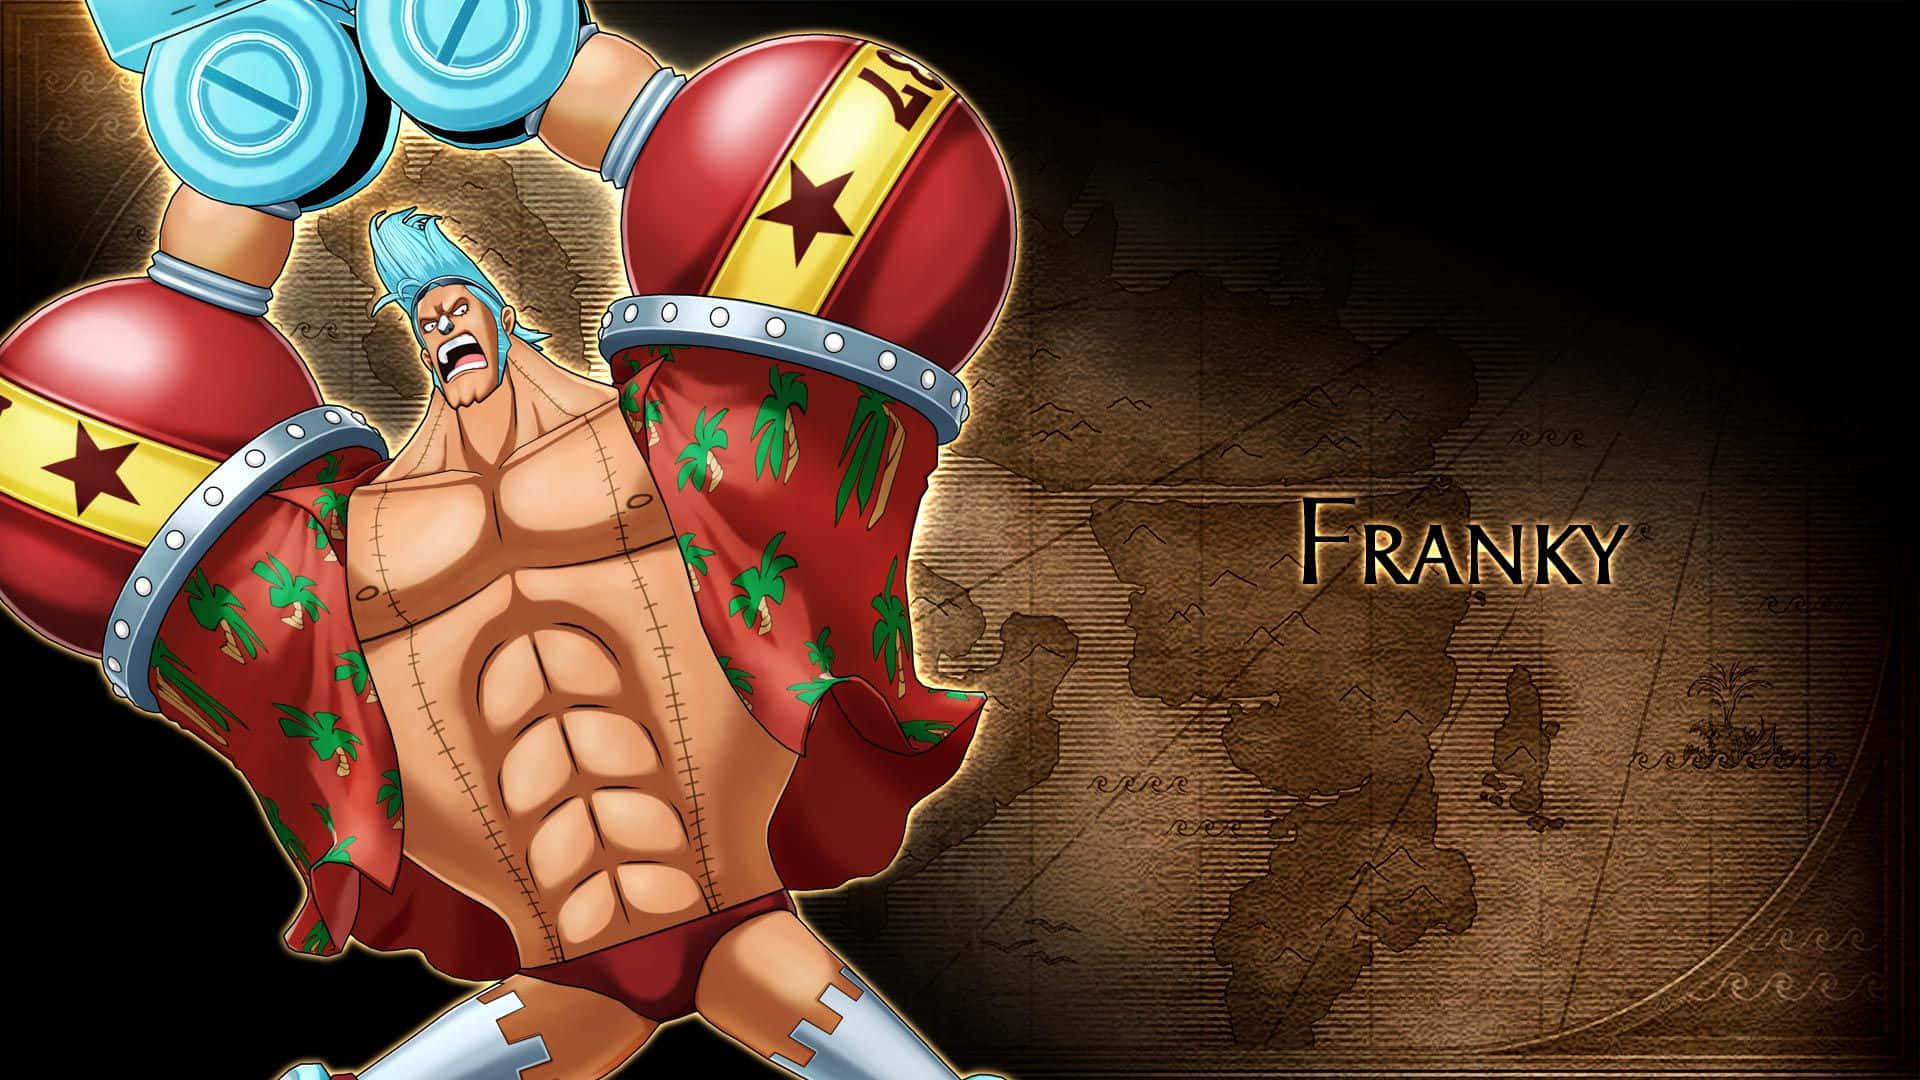 Let nothing stop you from achieving your dreams - Franky Wallpaper